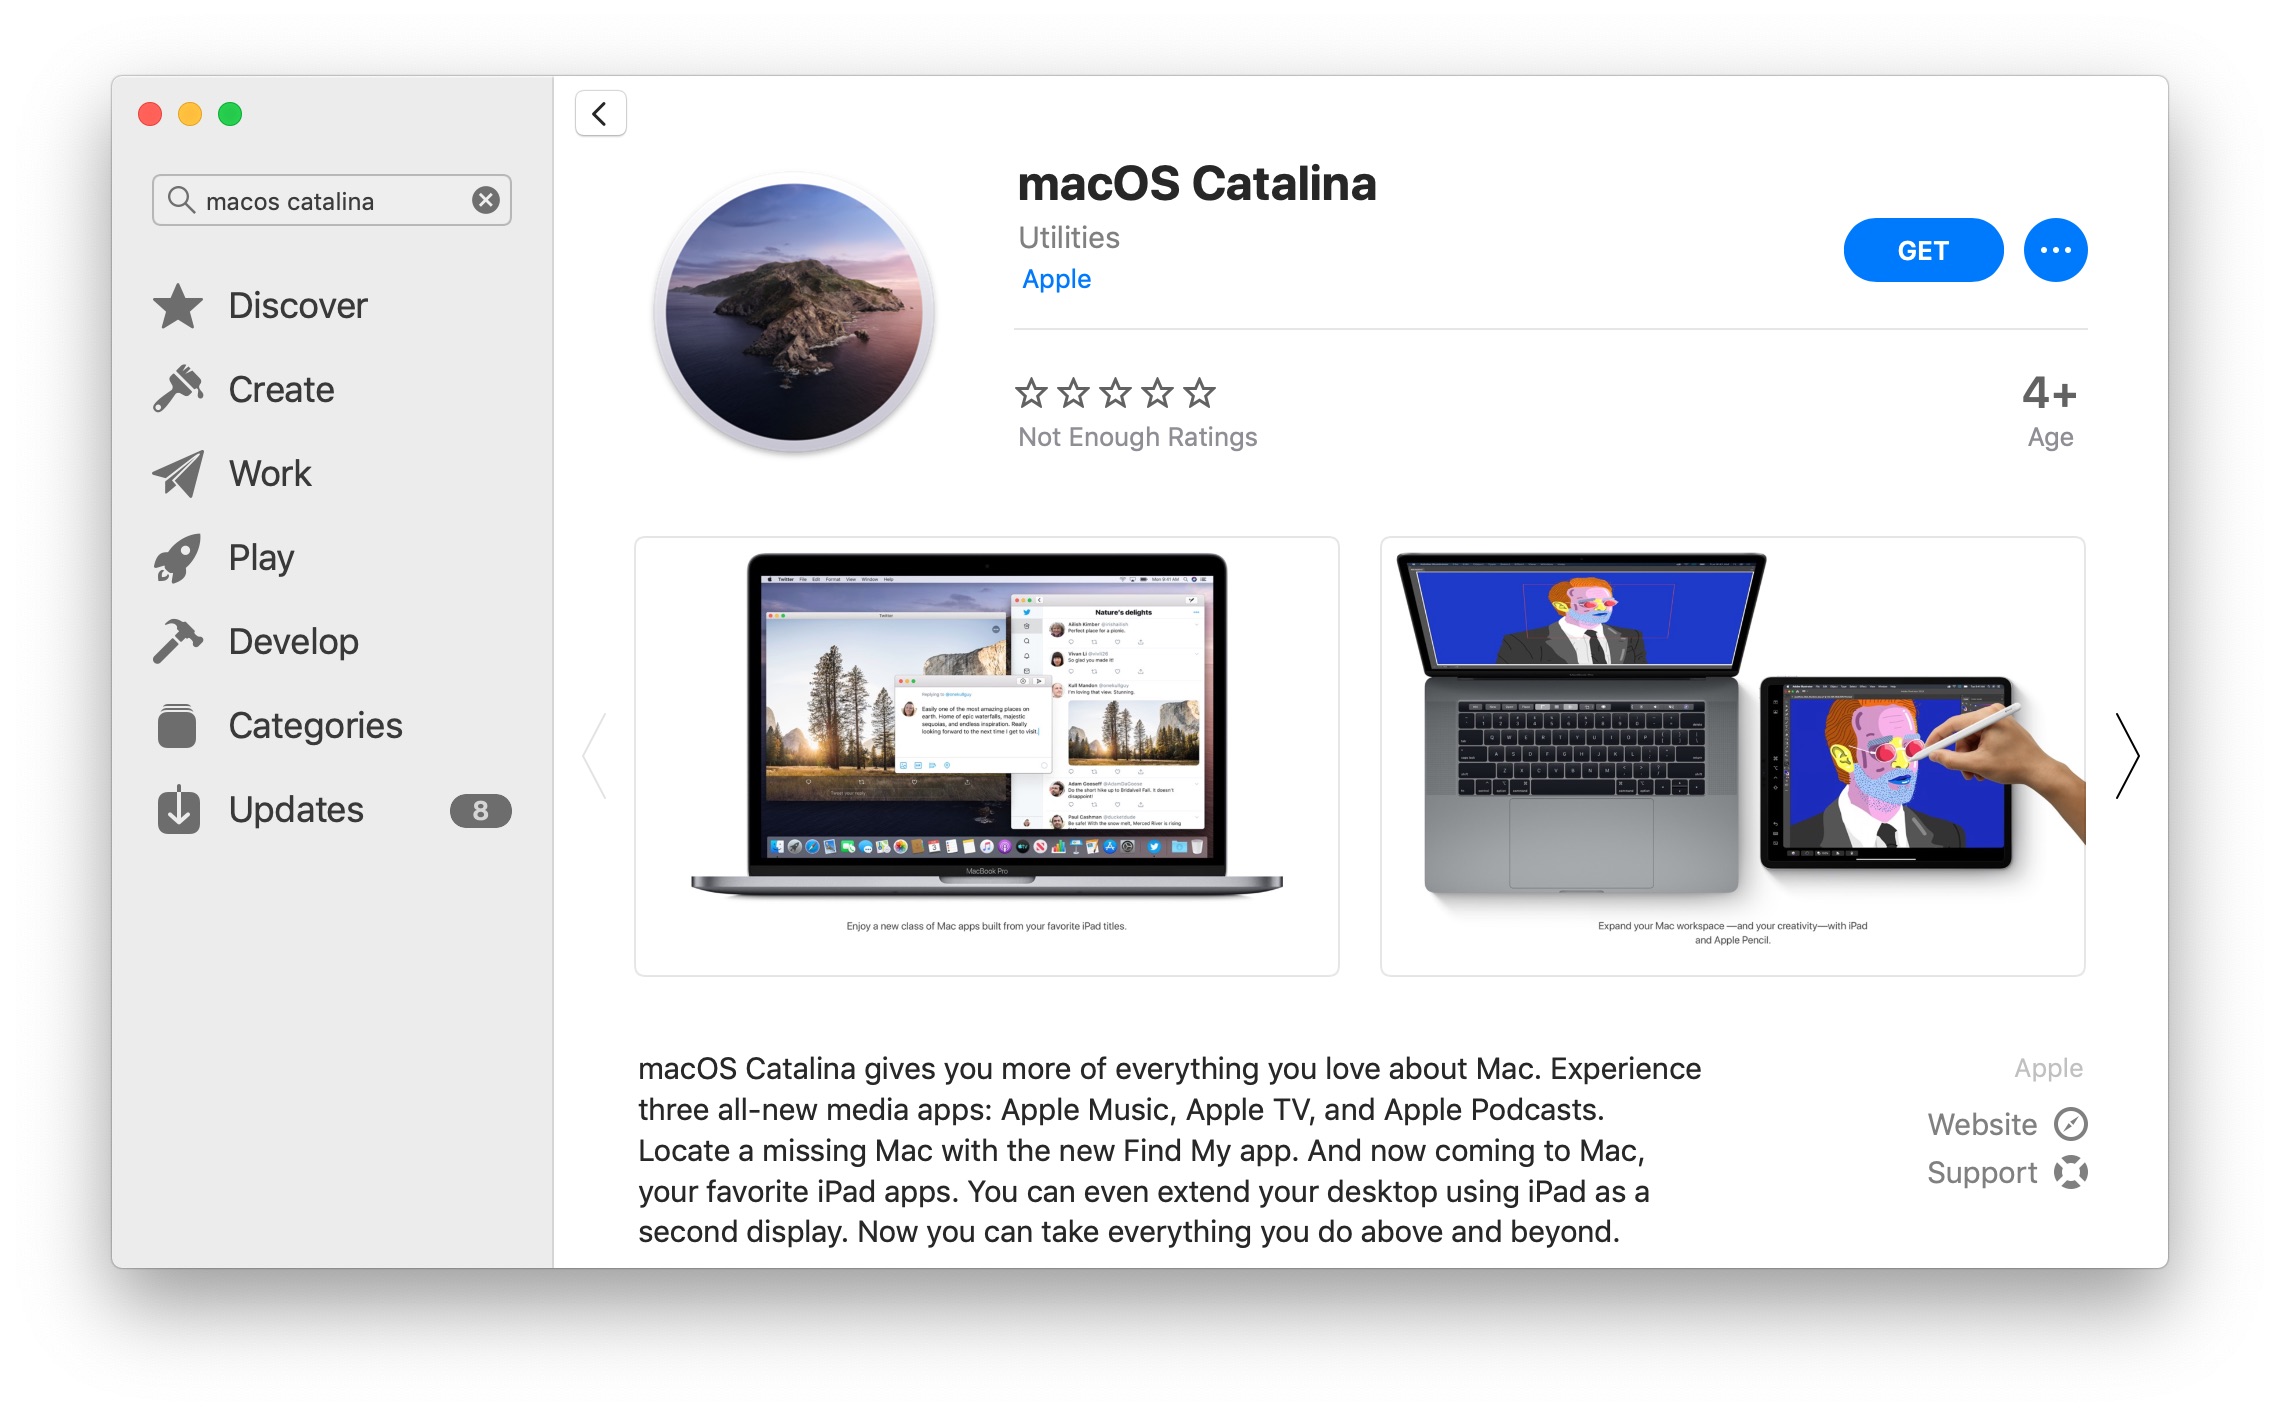 Will macos catalina support 32 bit apps